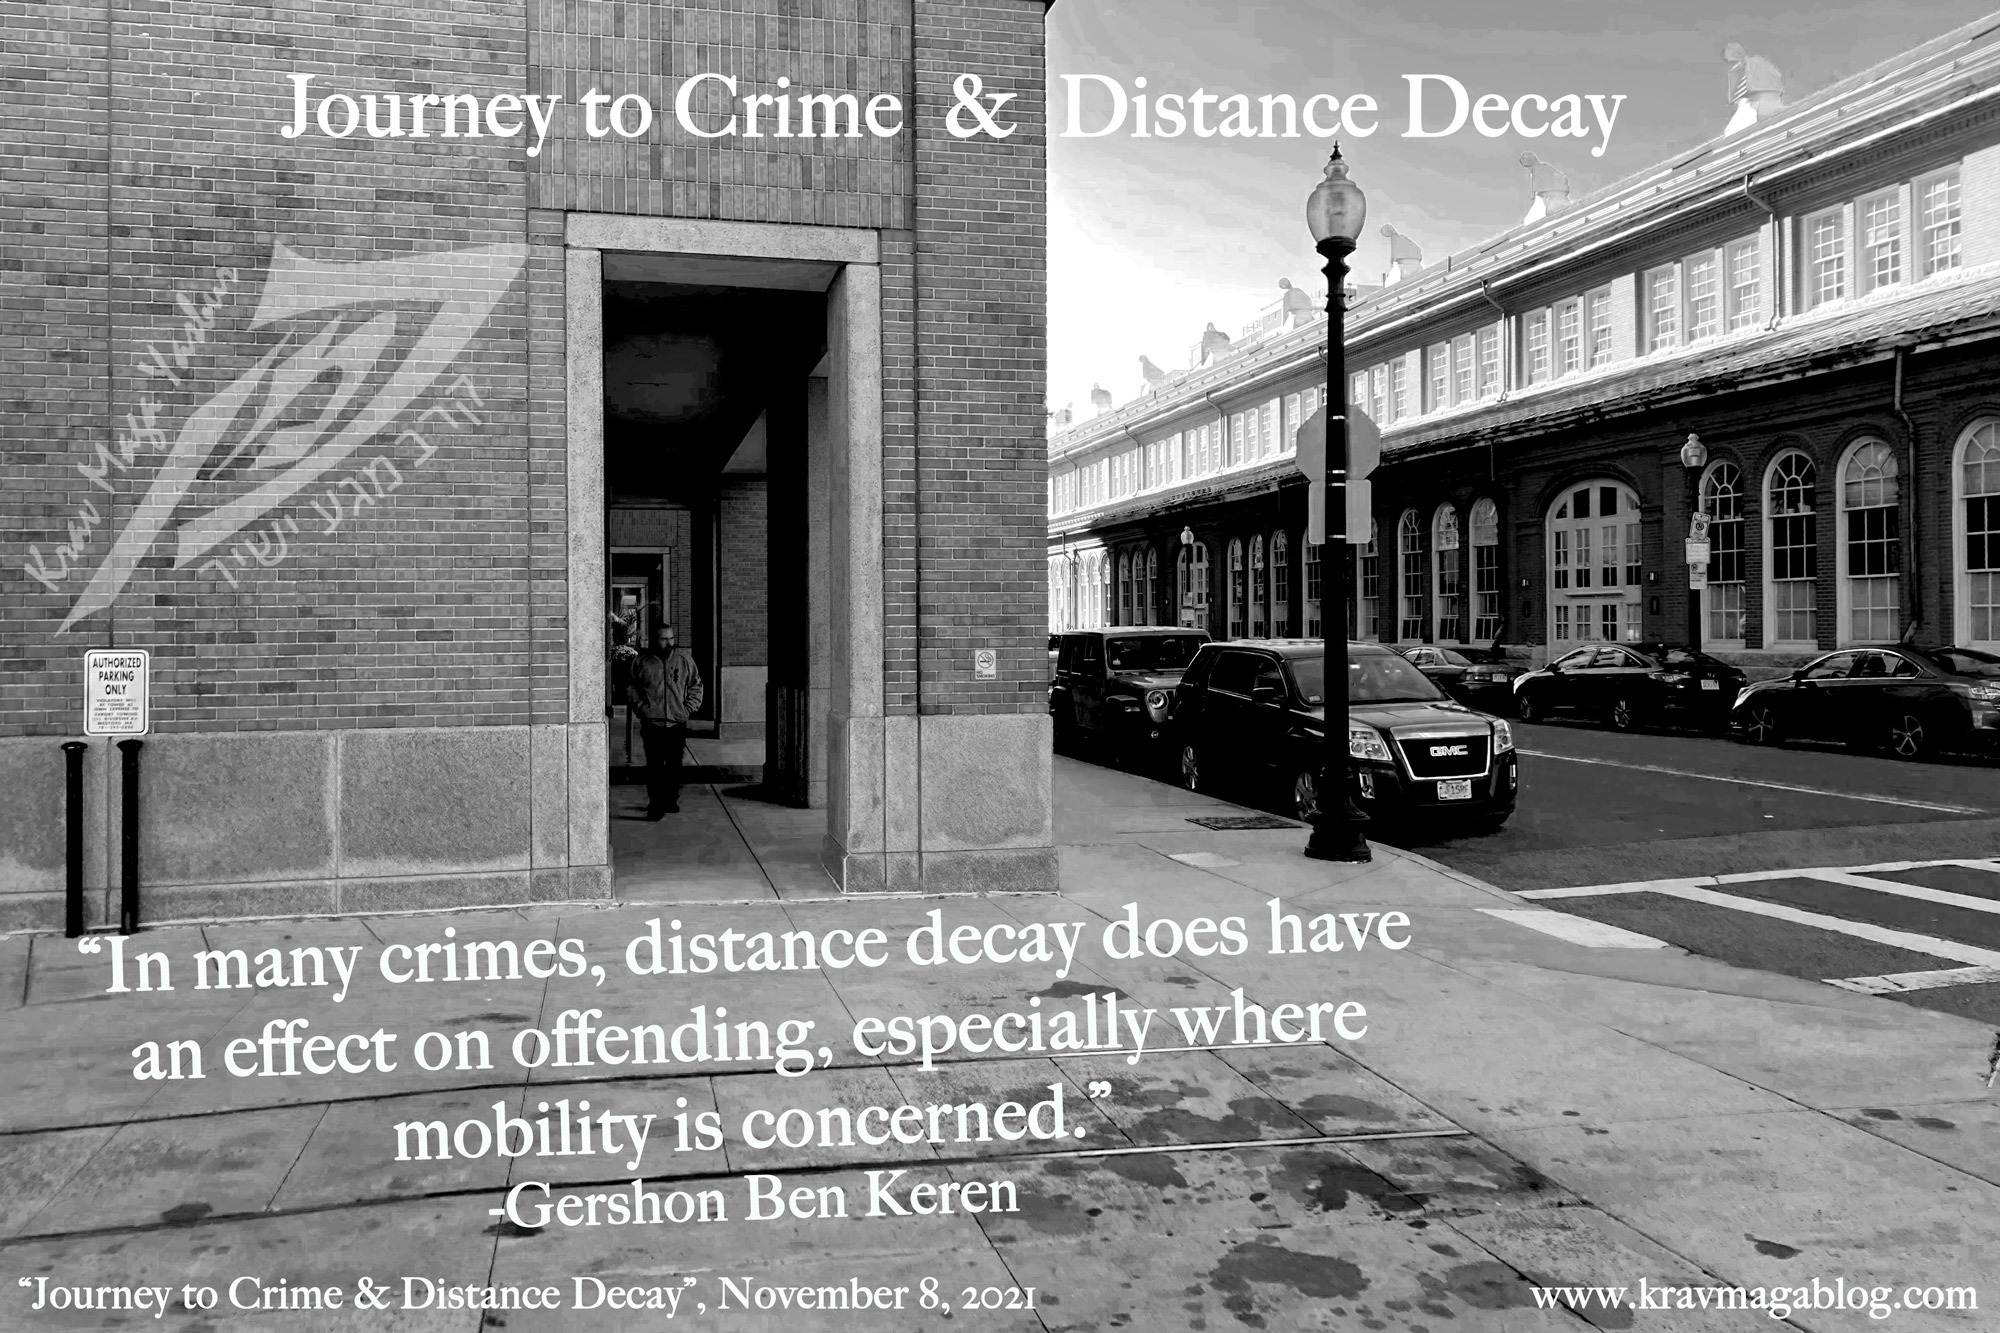 Blog About The Journey to Crime & Distance Decay